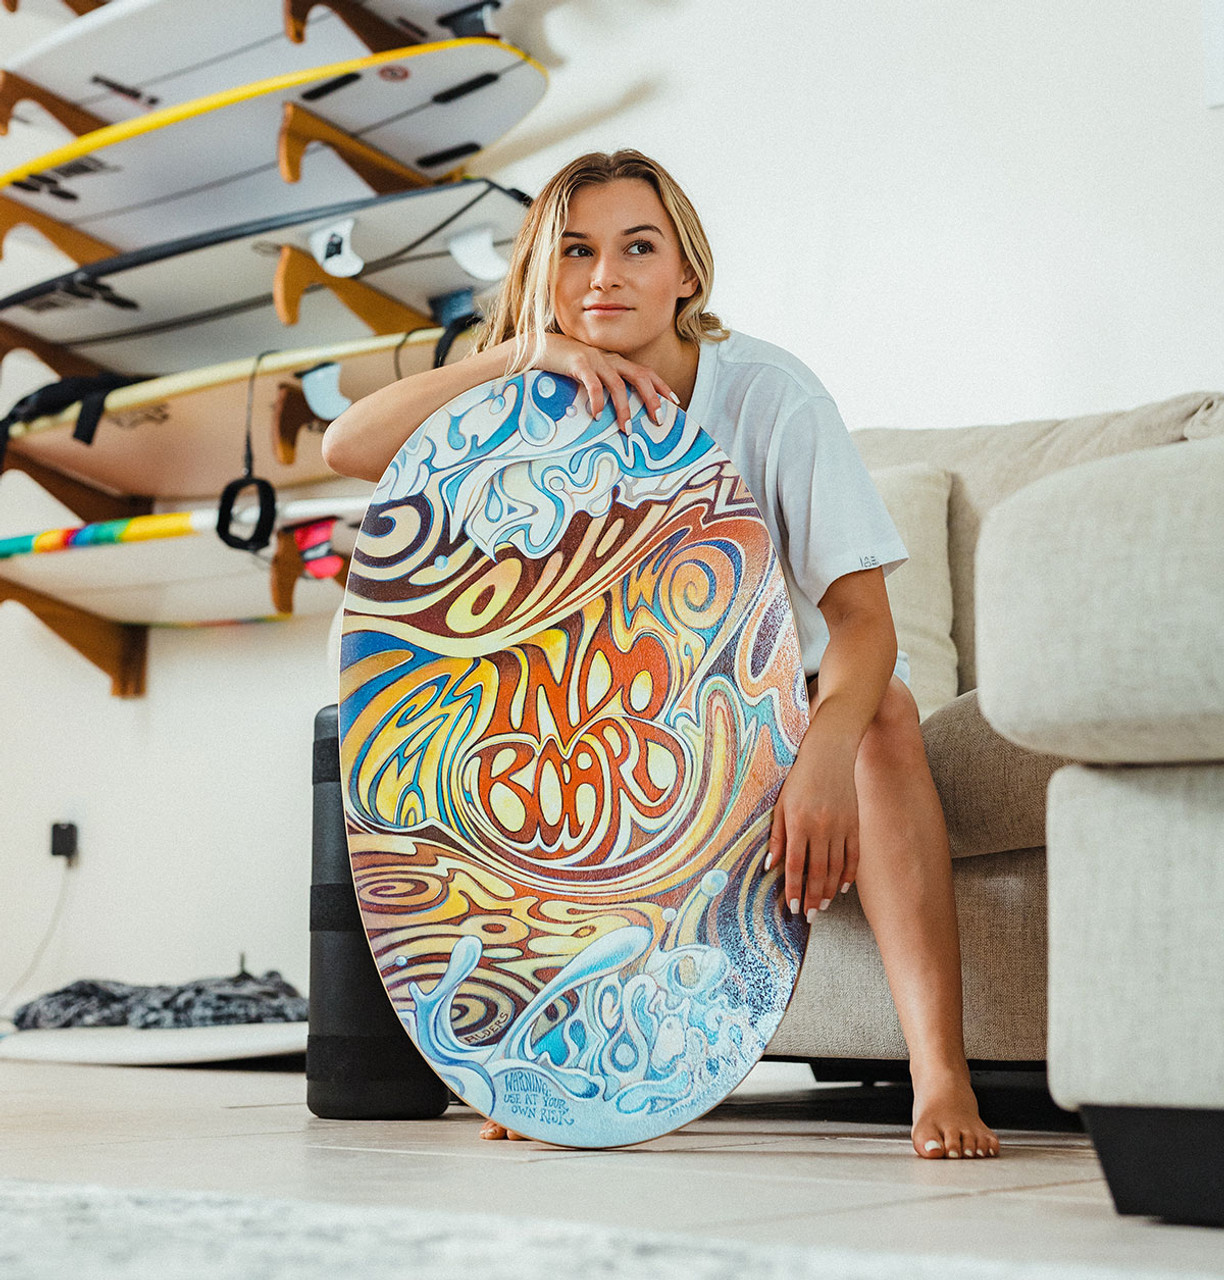 INDO BOARD® - Original Deck Only - Free Shipping on Orders $100+